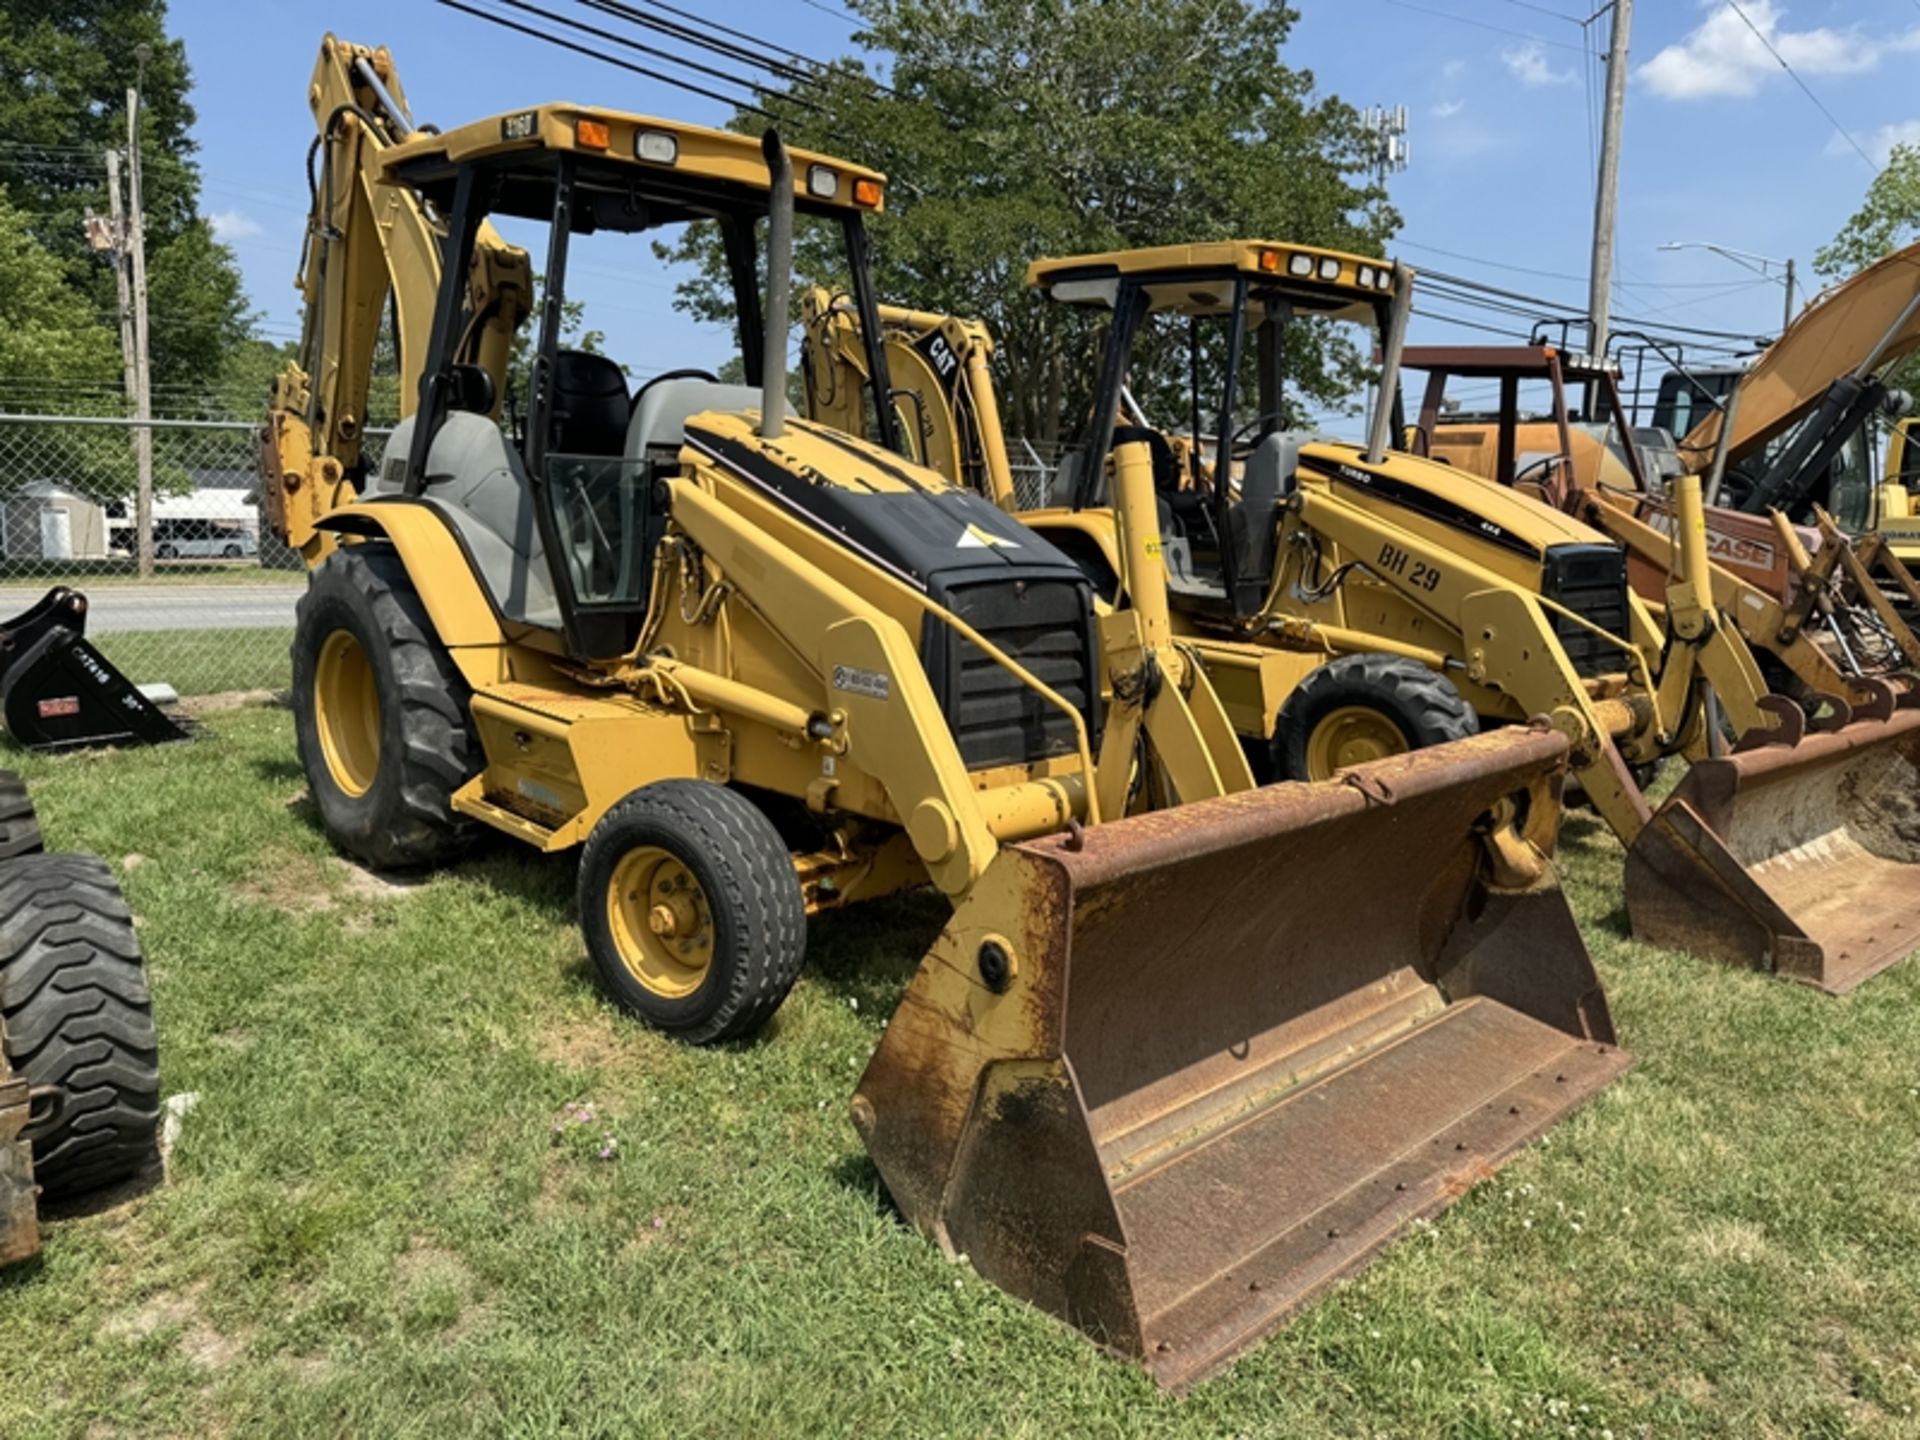 CAT 416D backhoe, 2wd with TRAMAC SC36 jackhammer and 30" rear bucket – 2388 hours showing - - Image 2 of 5